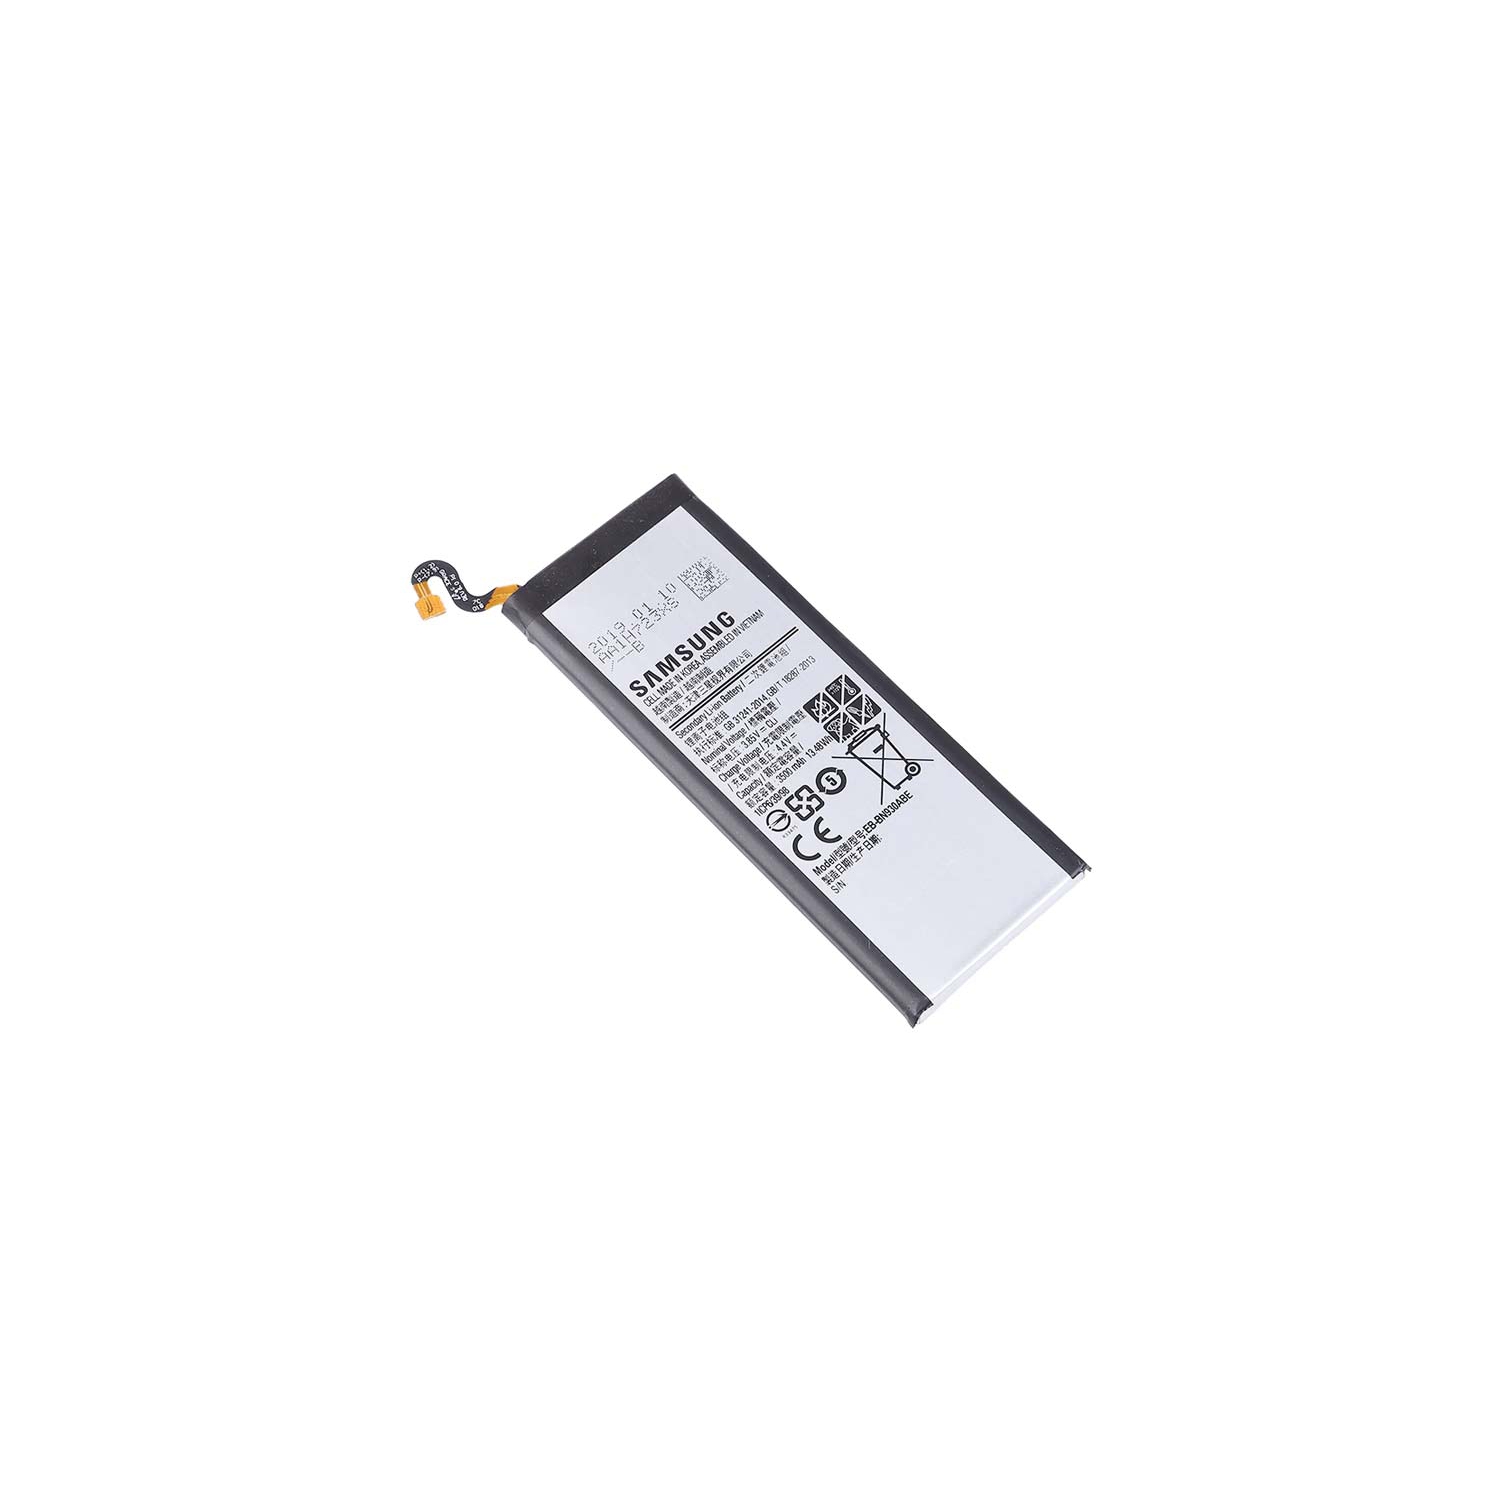 Samsung Galaxy Note 7 Replacement Battery, EB-BN930ABE / EB-BN930ABA